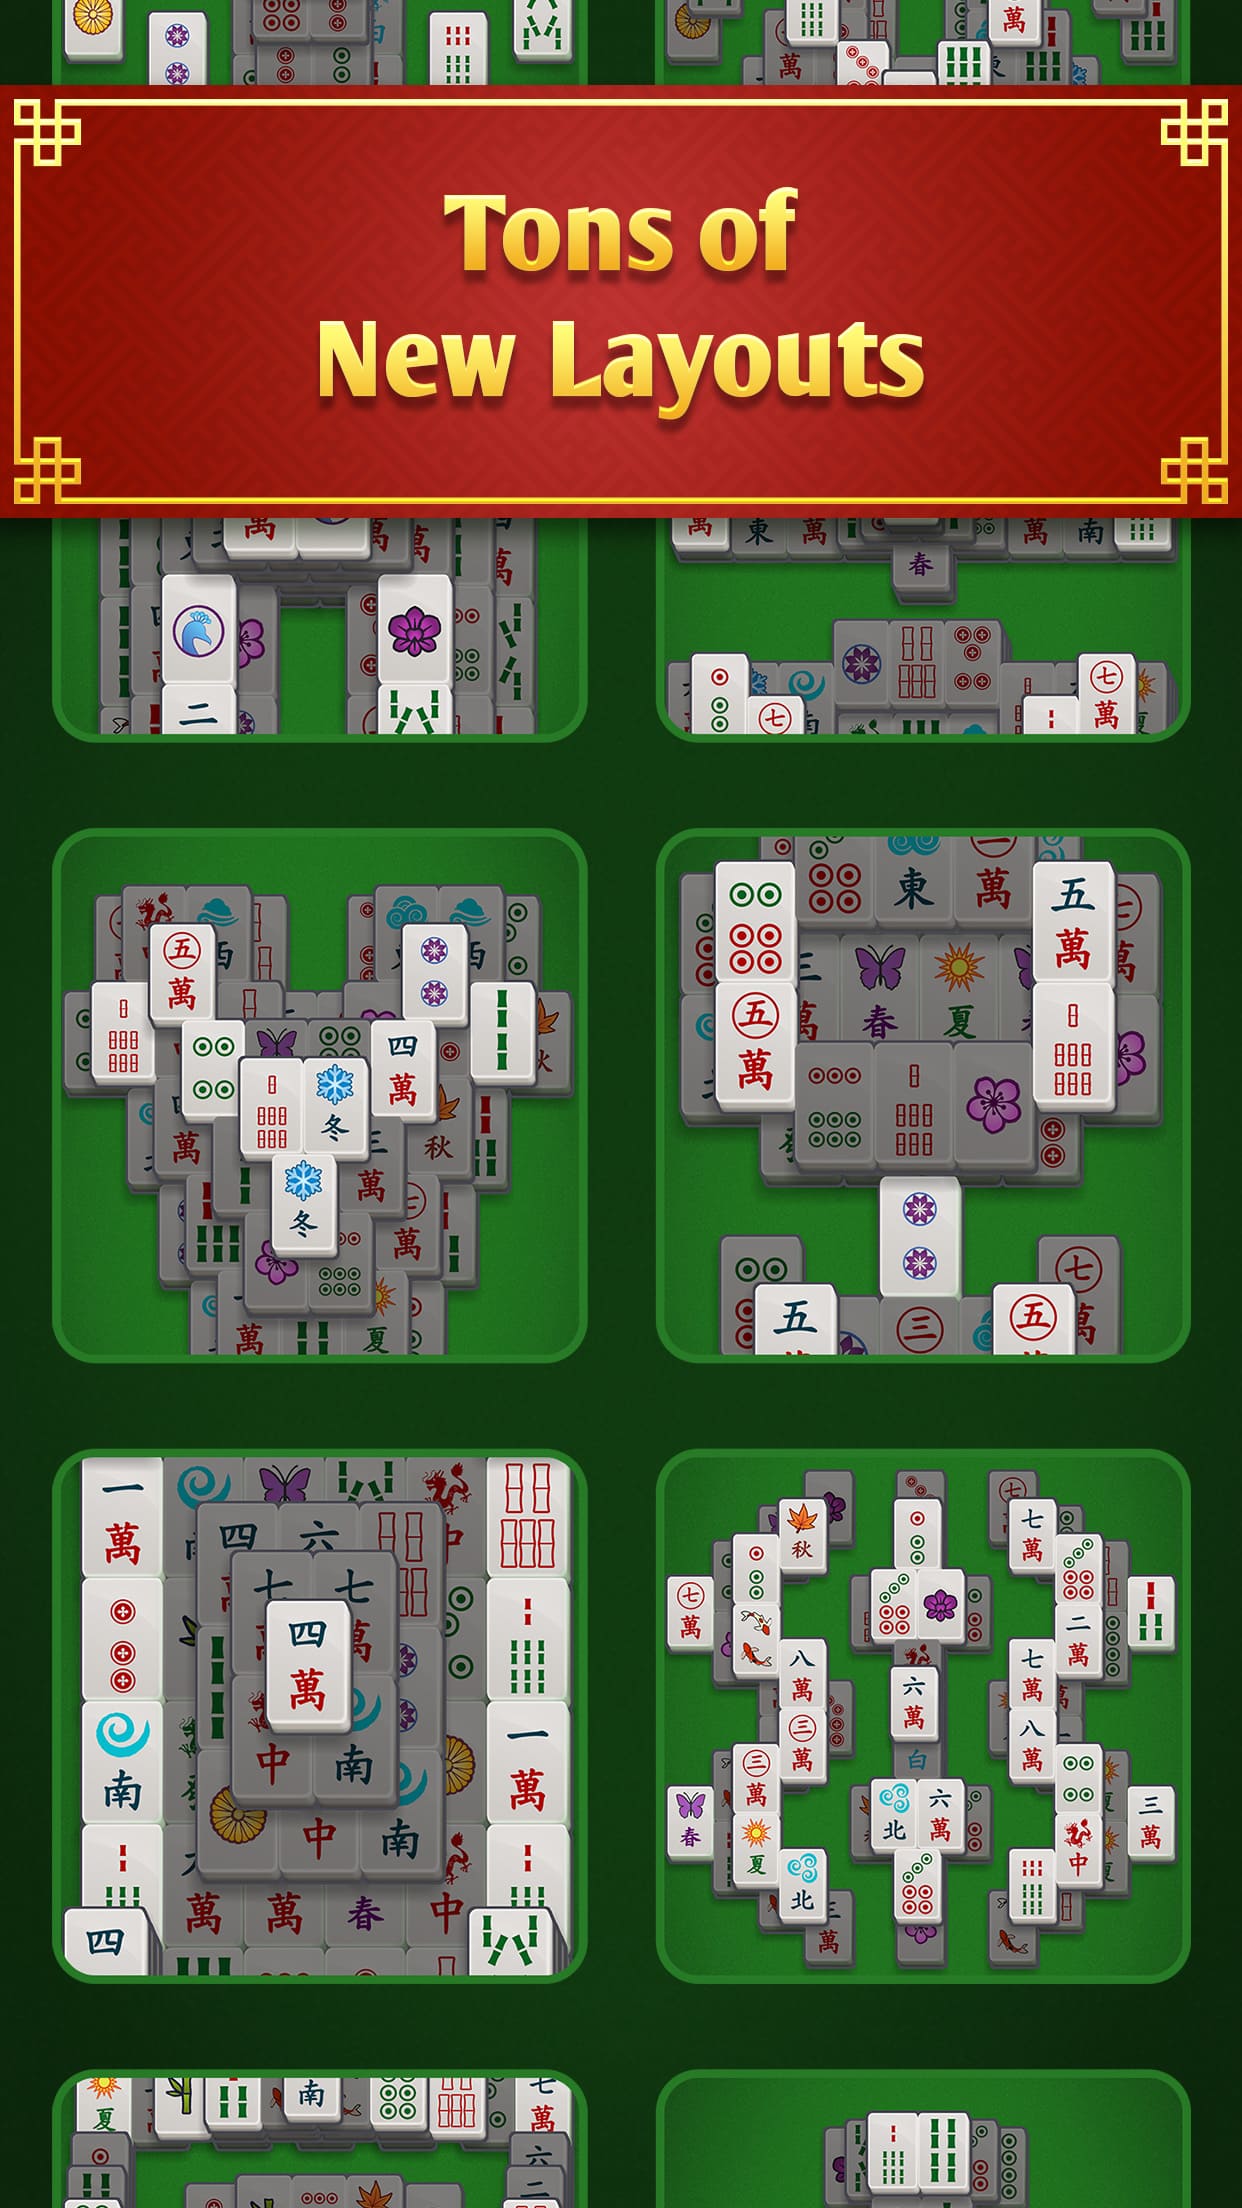 Mahjong Solitaire + on the App Store